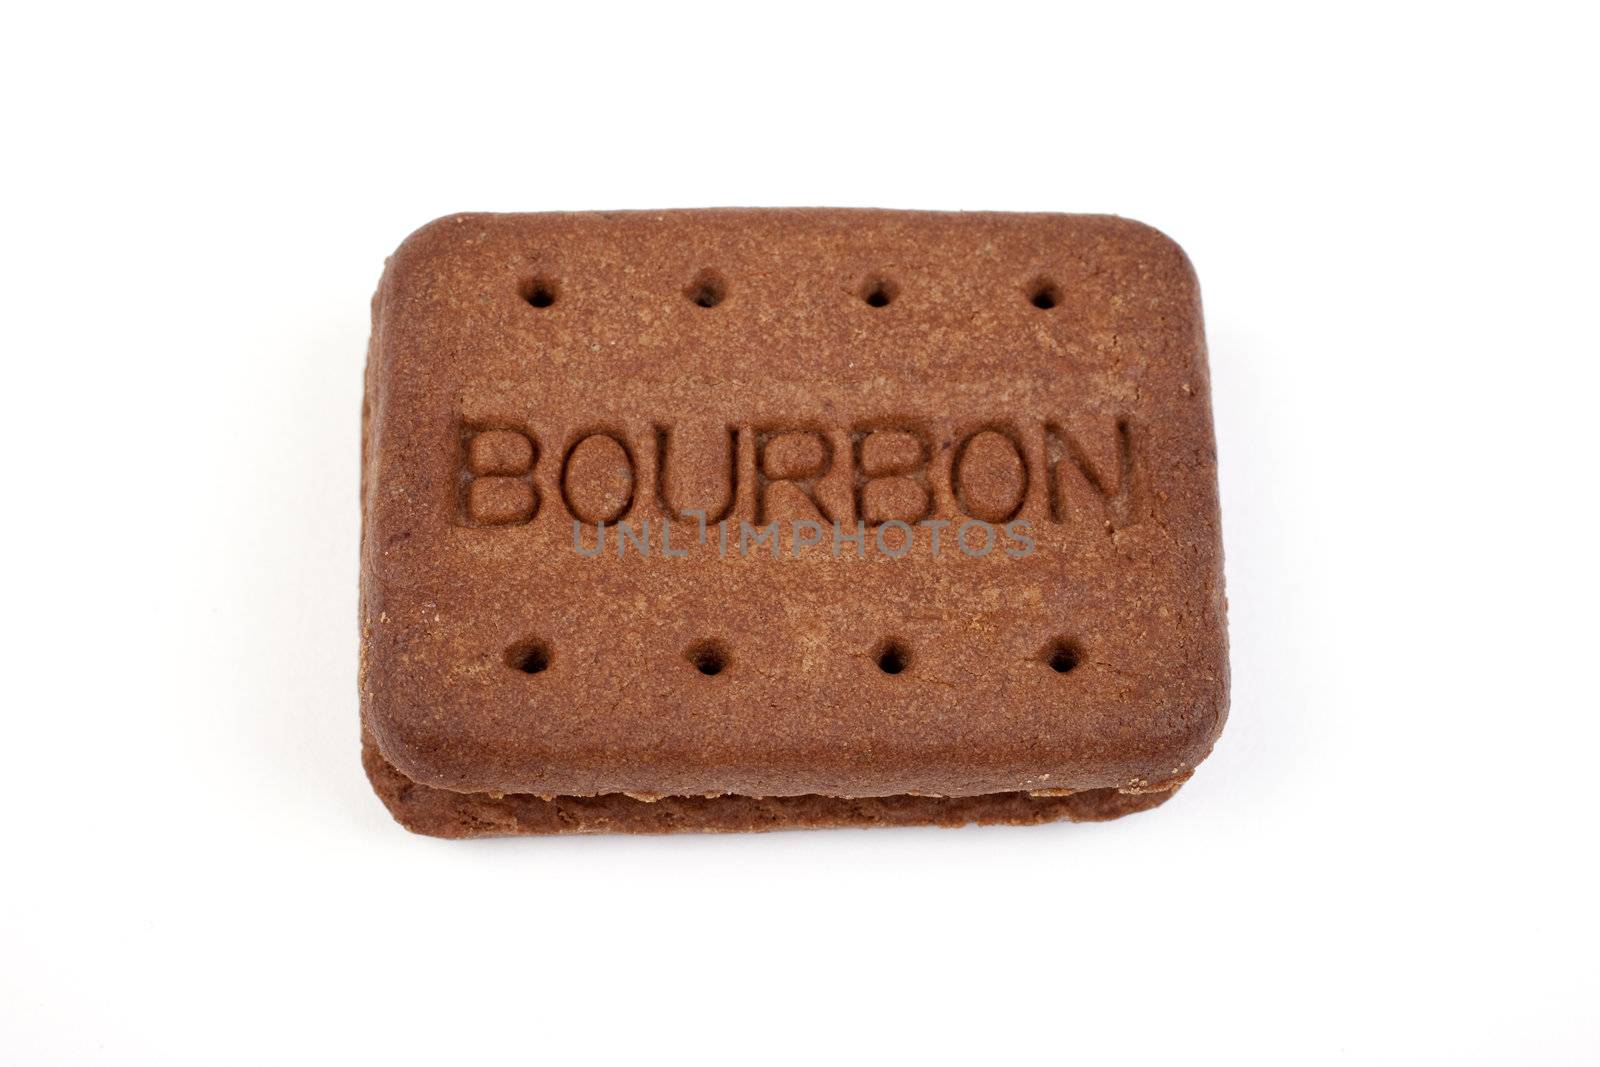 A Bourbon biscuit on a white background.